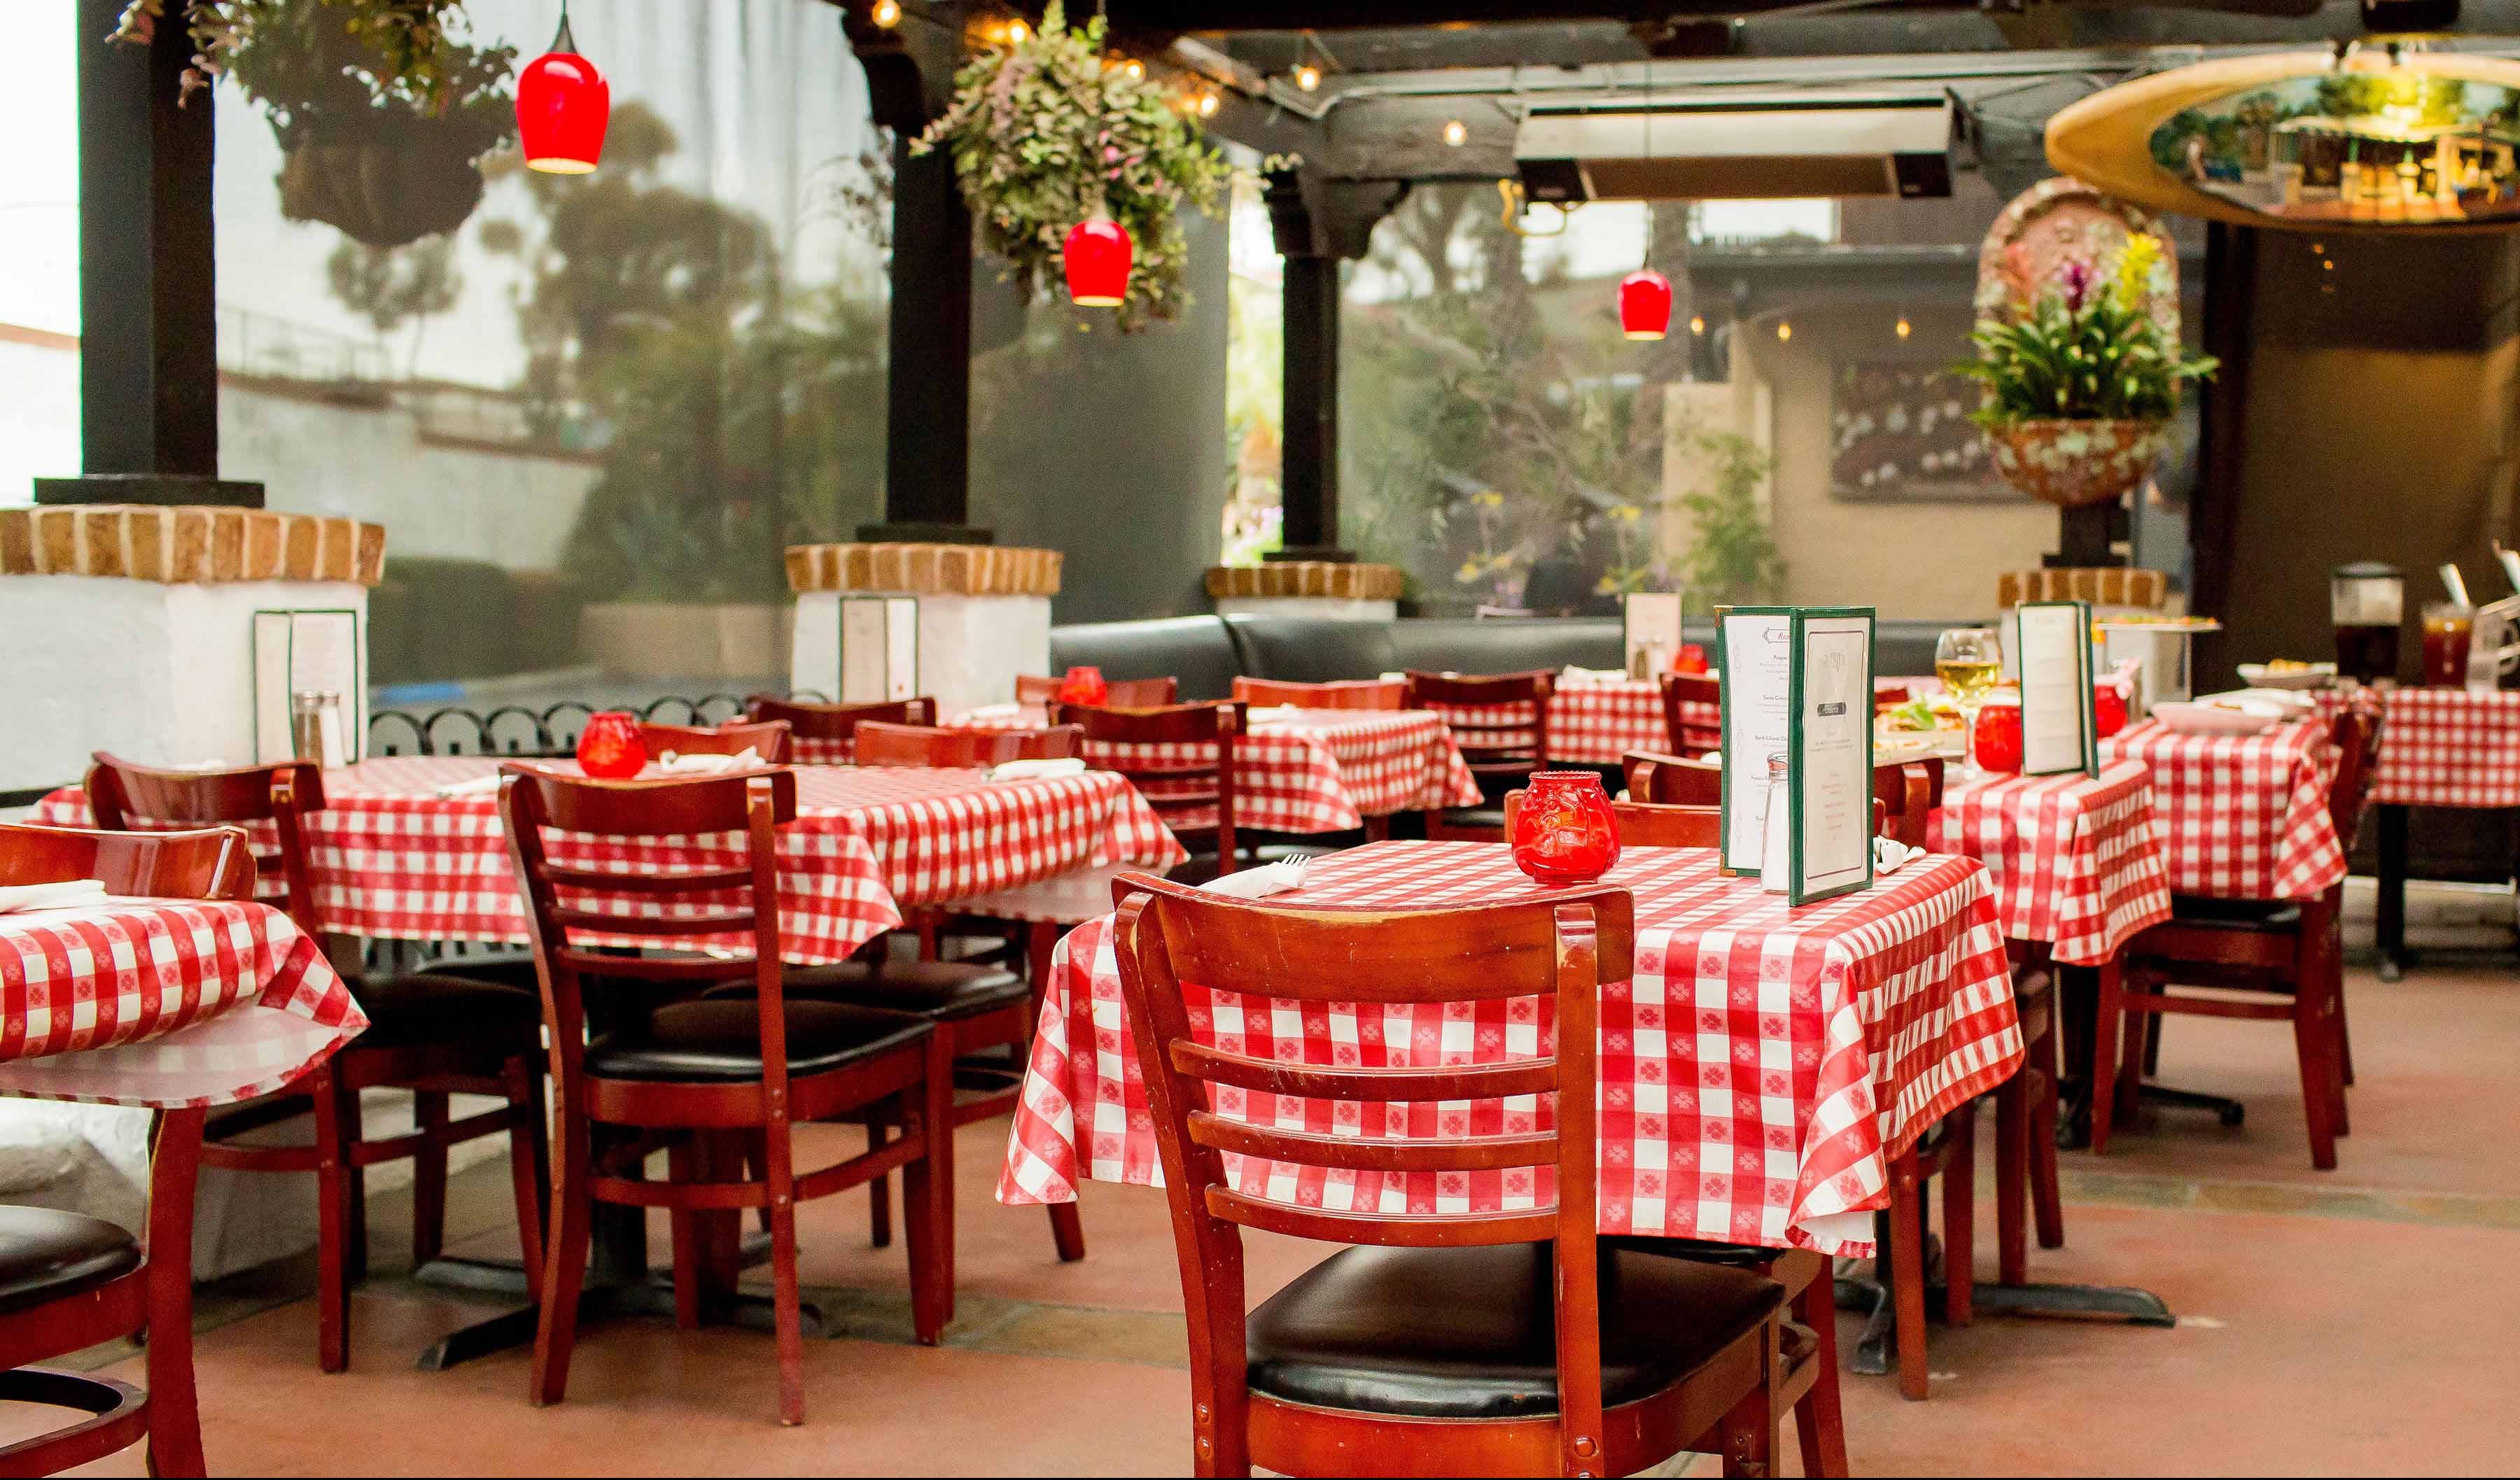 Sonny's Outdoor Covered patio seating with red and white table clothes and hanging lights